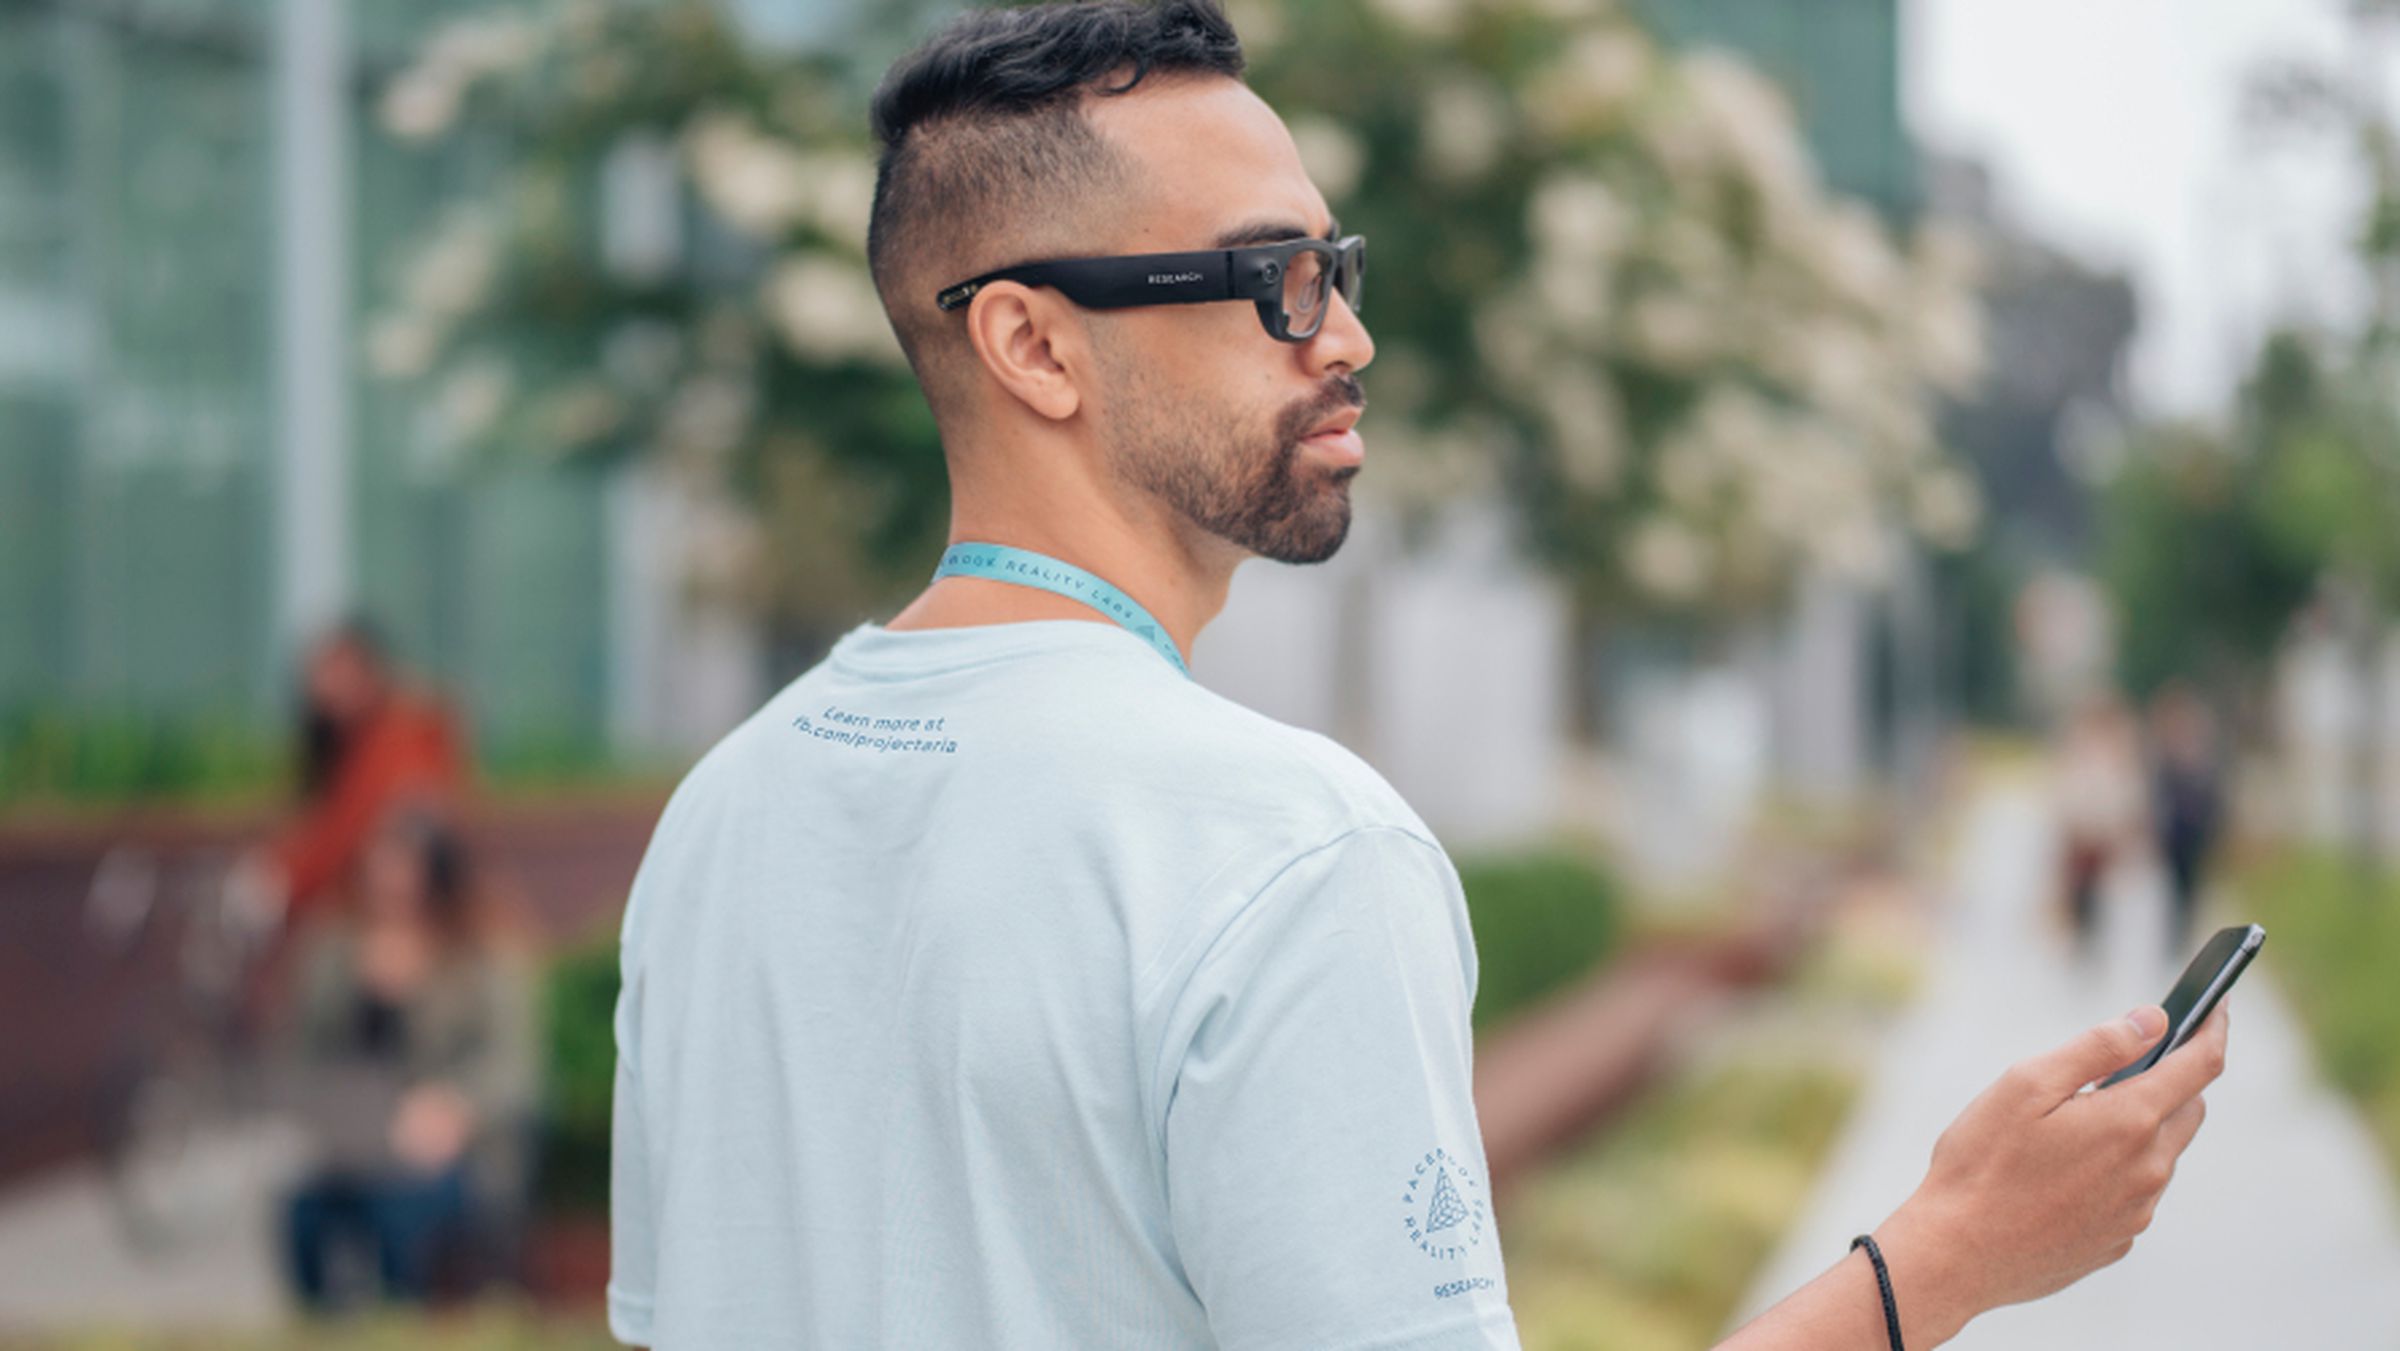 A prototype pair of Project Aria AR glasses Facebook will use to research AR technology, distinct from the Ray-Ban smart glasses it plans to release next year. 